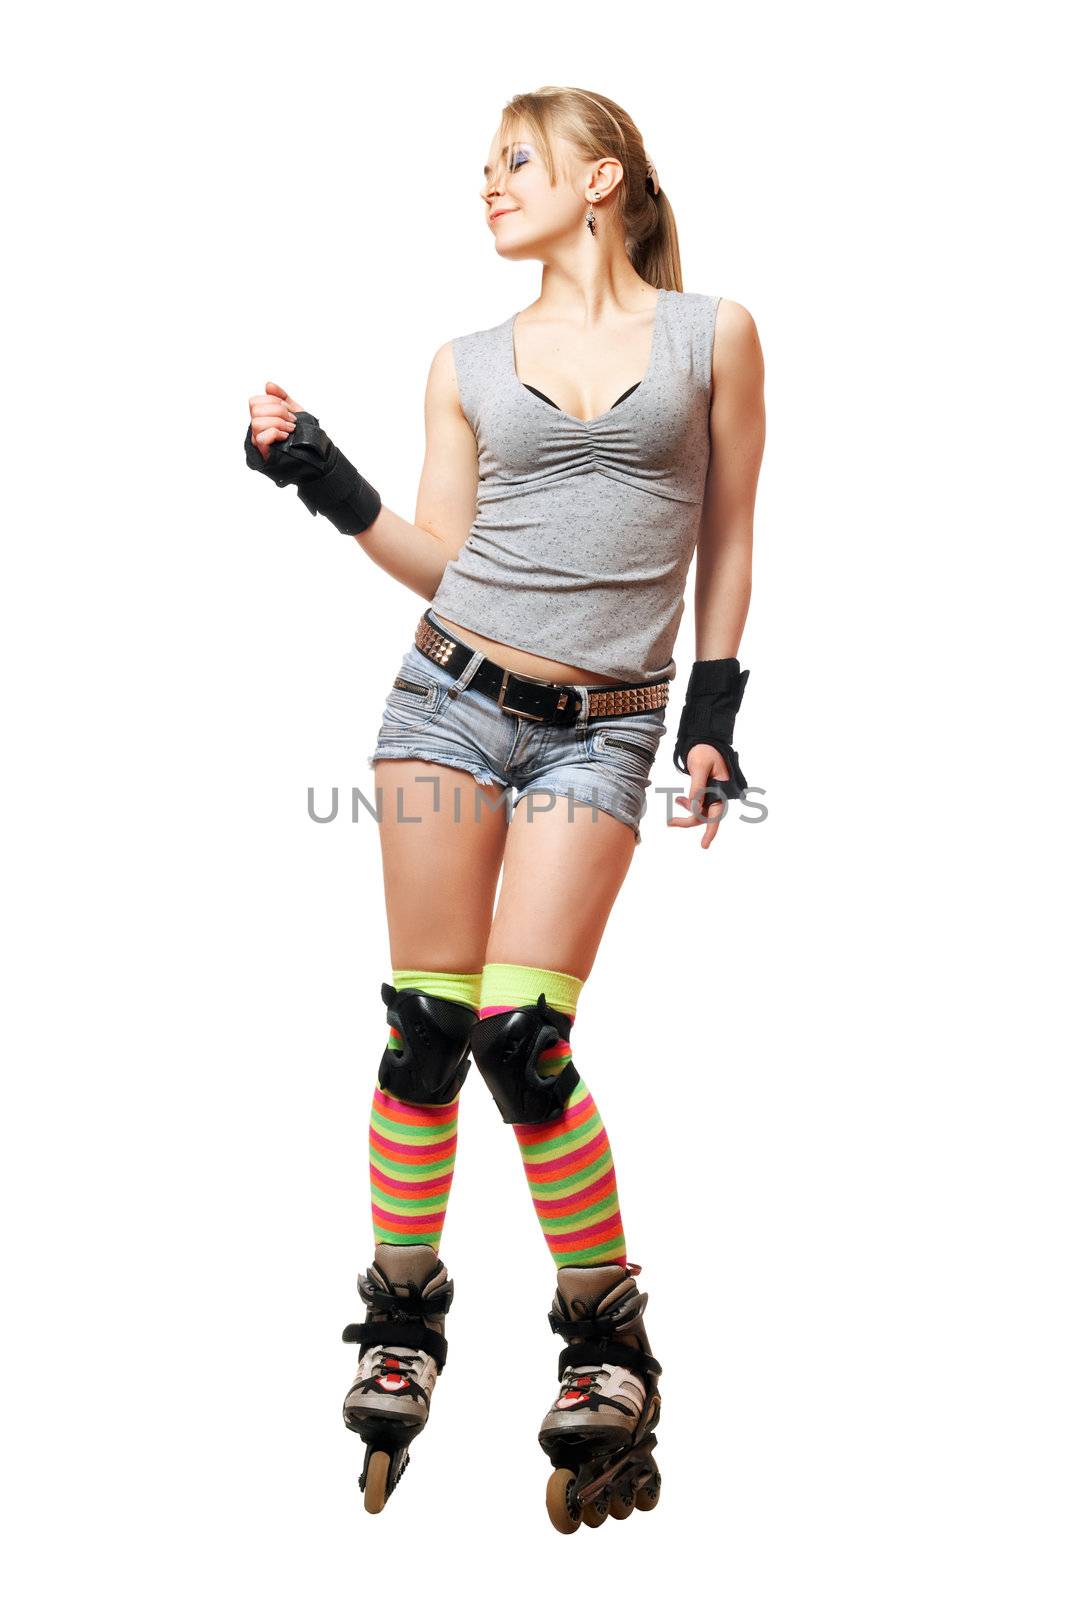 Playful beautiful young woman on roller skates